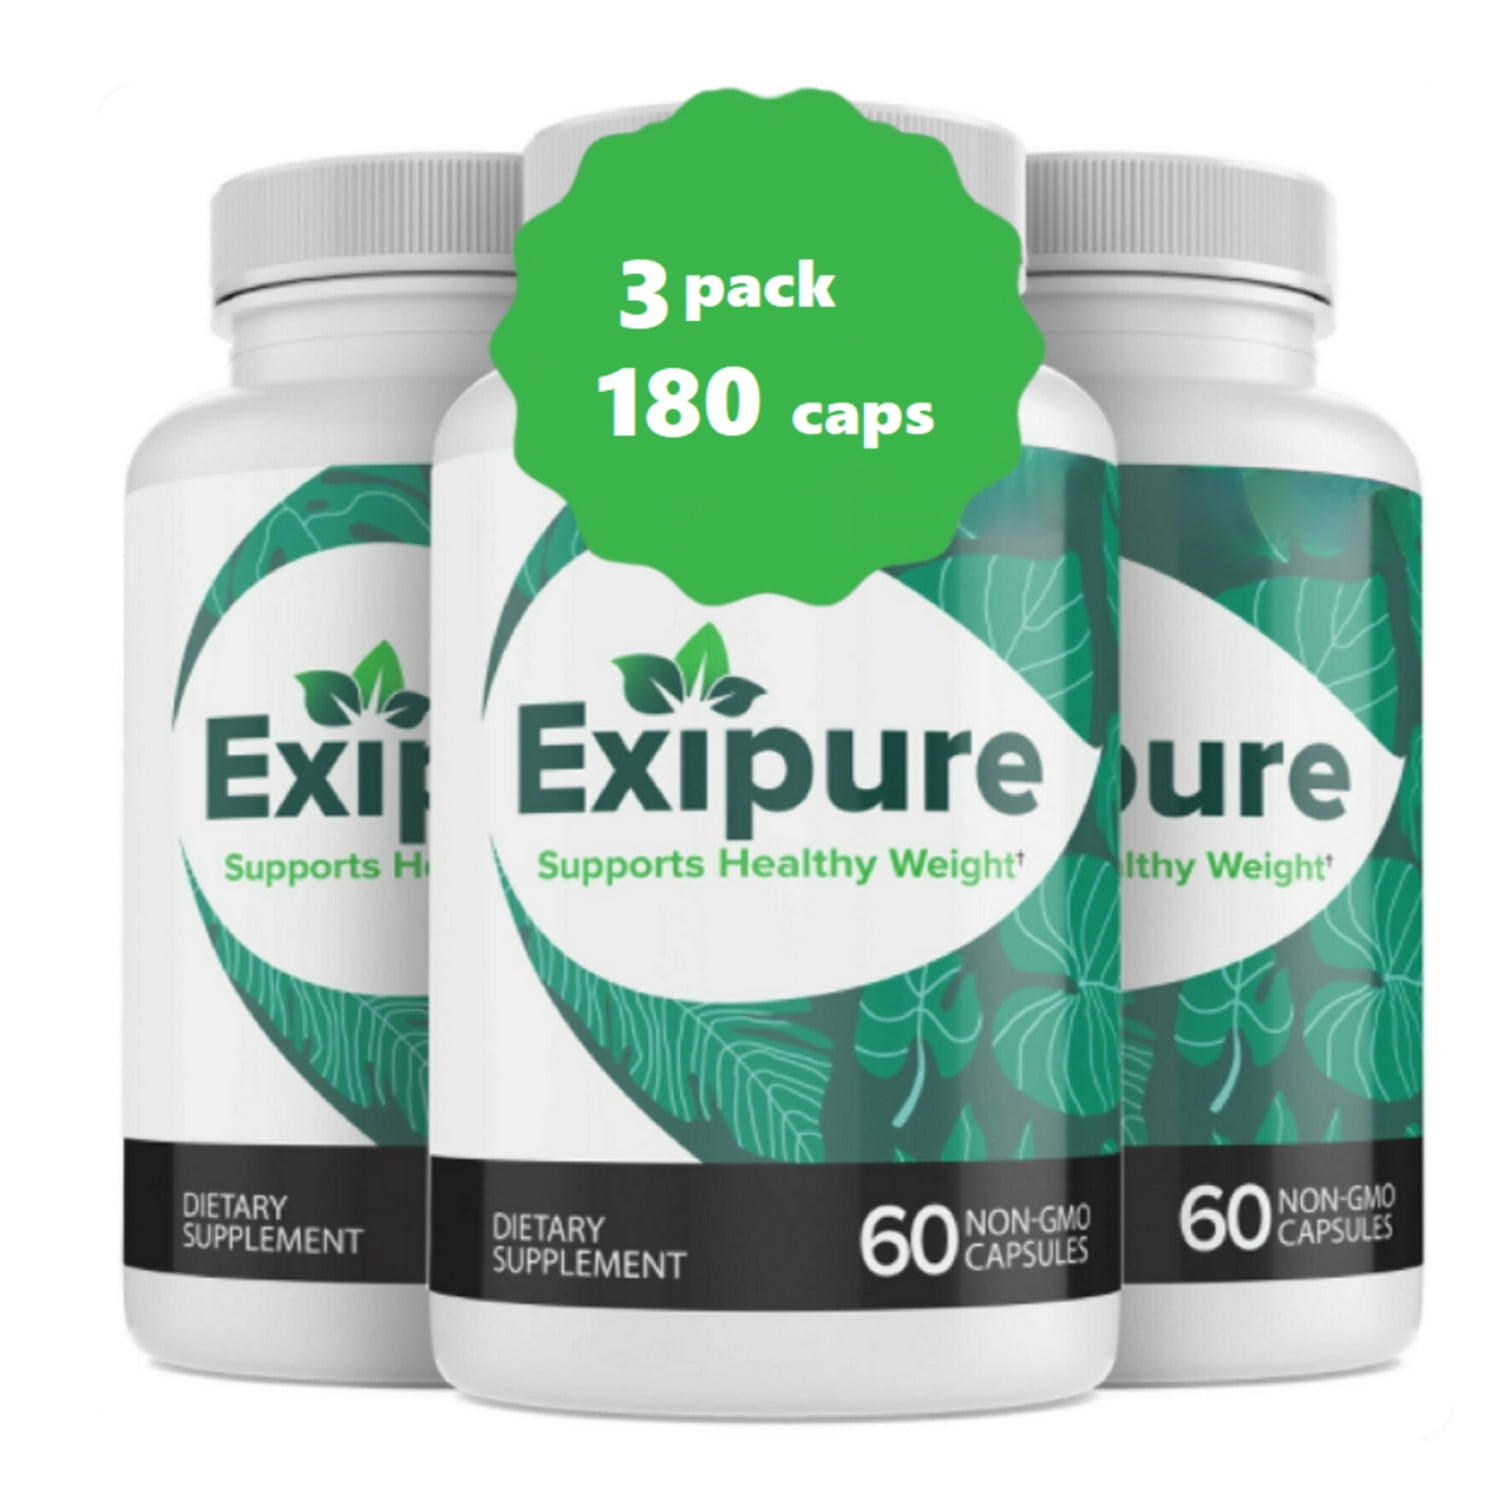 Exipure Reviews - Does It Work for Weight Loss? Paid Content Cleveland Cleveland Scene